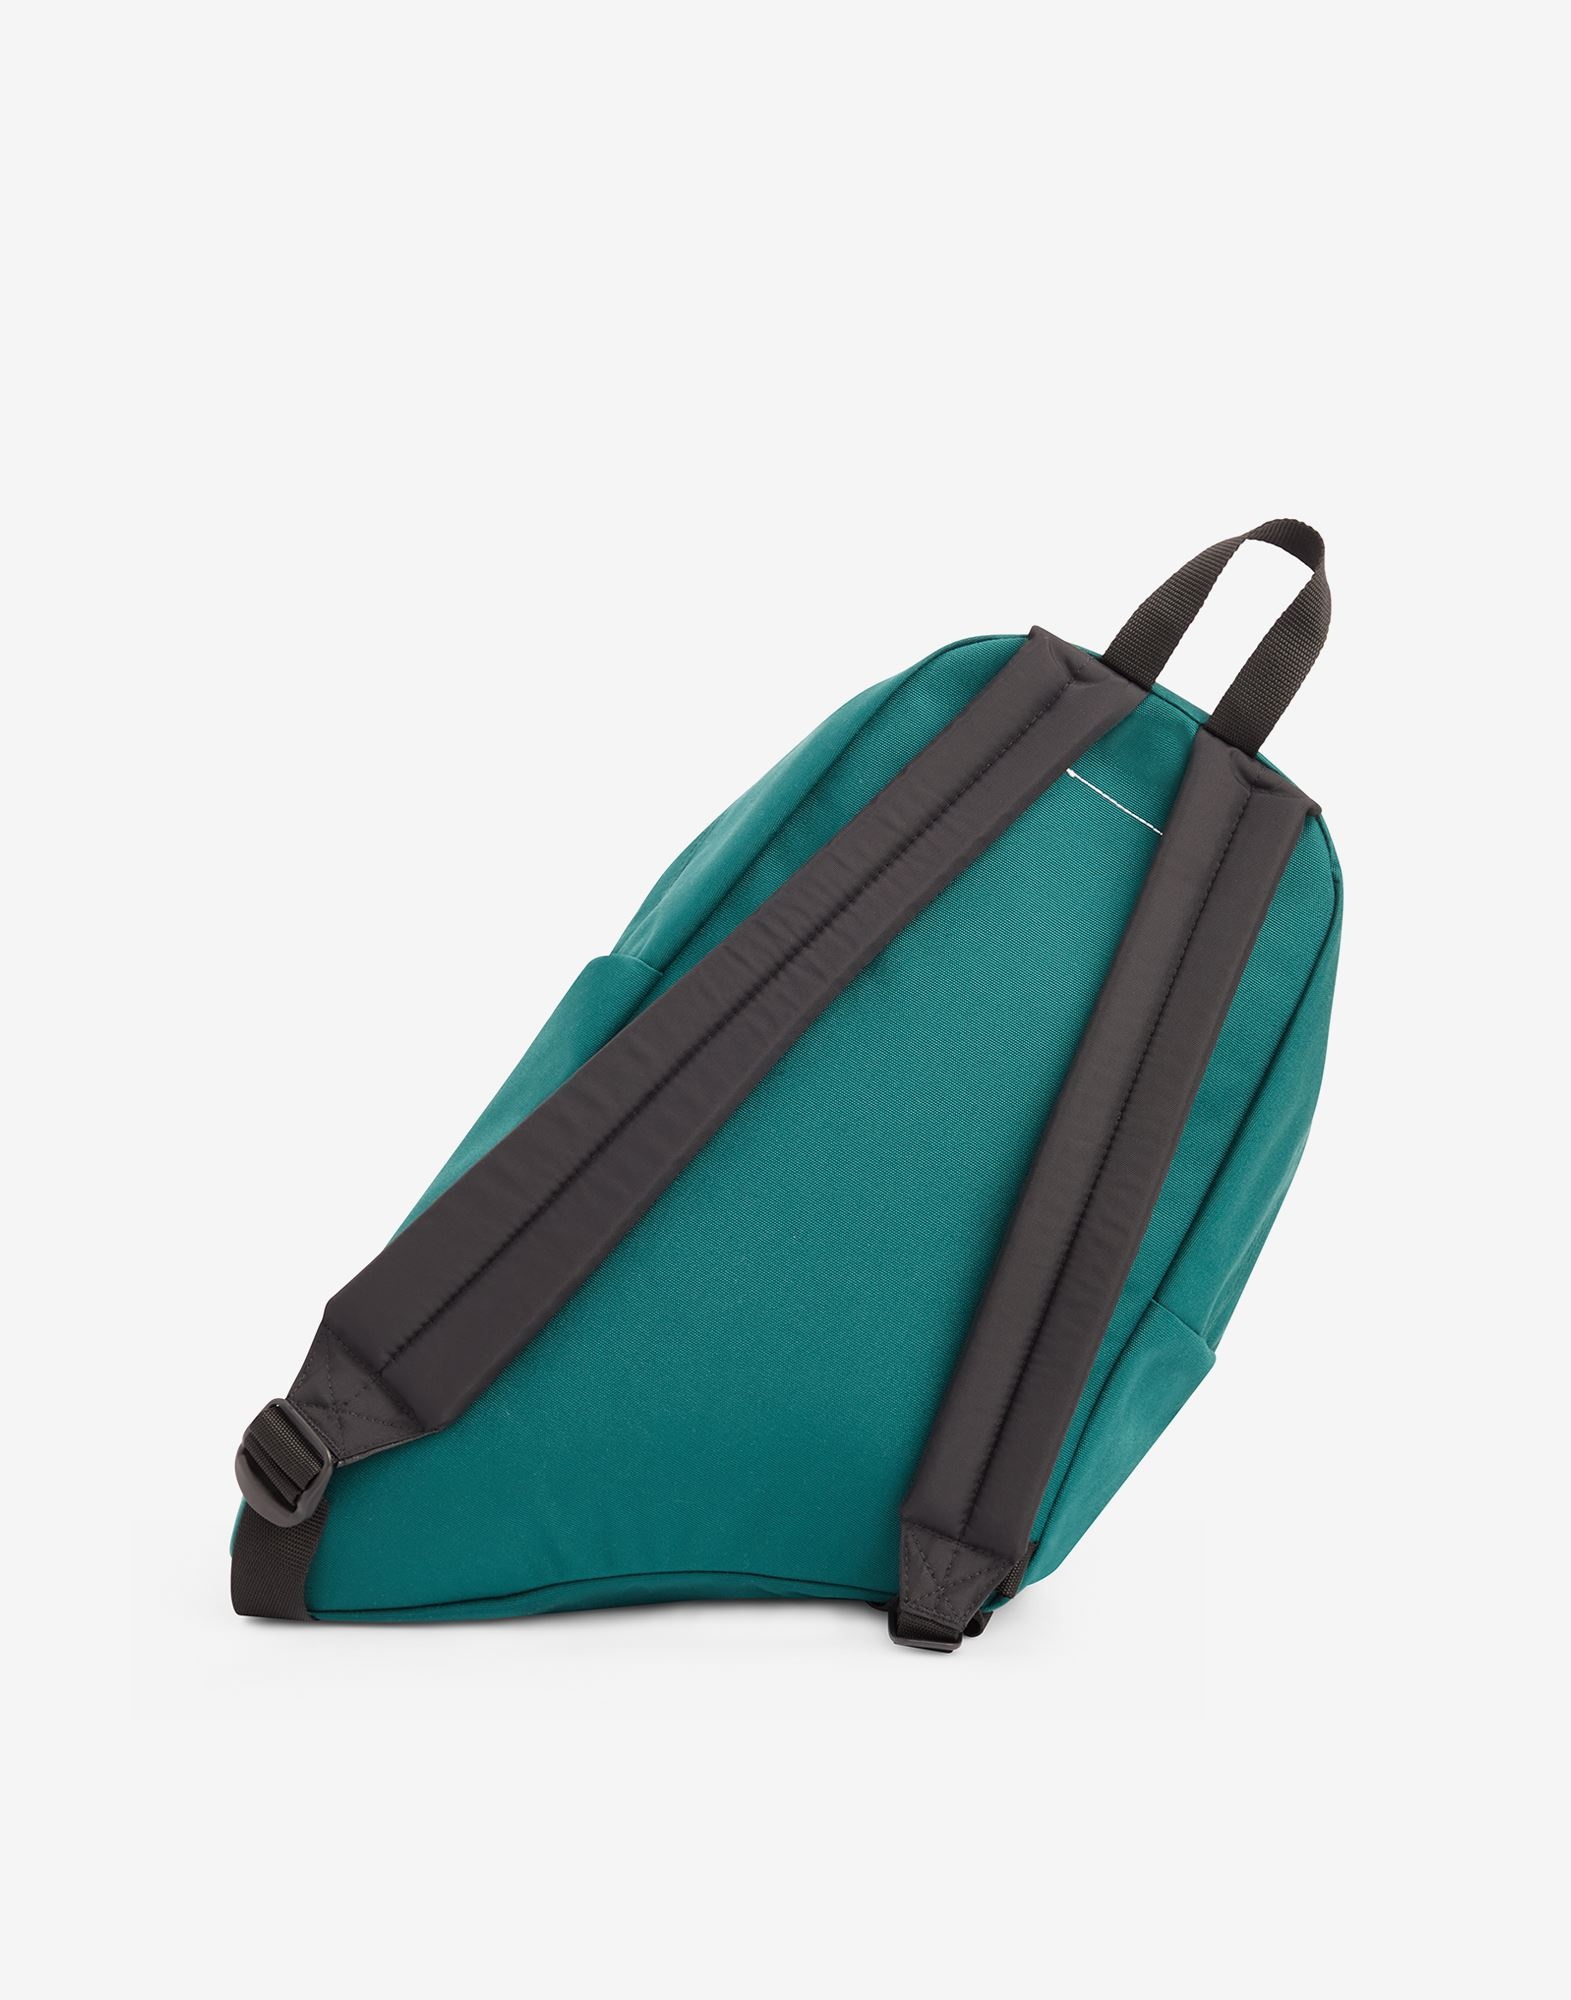 MM6 x Eastpak
Dripping Backpack - 3